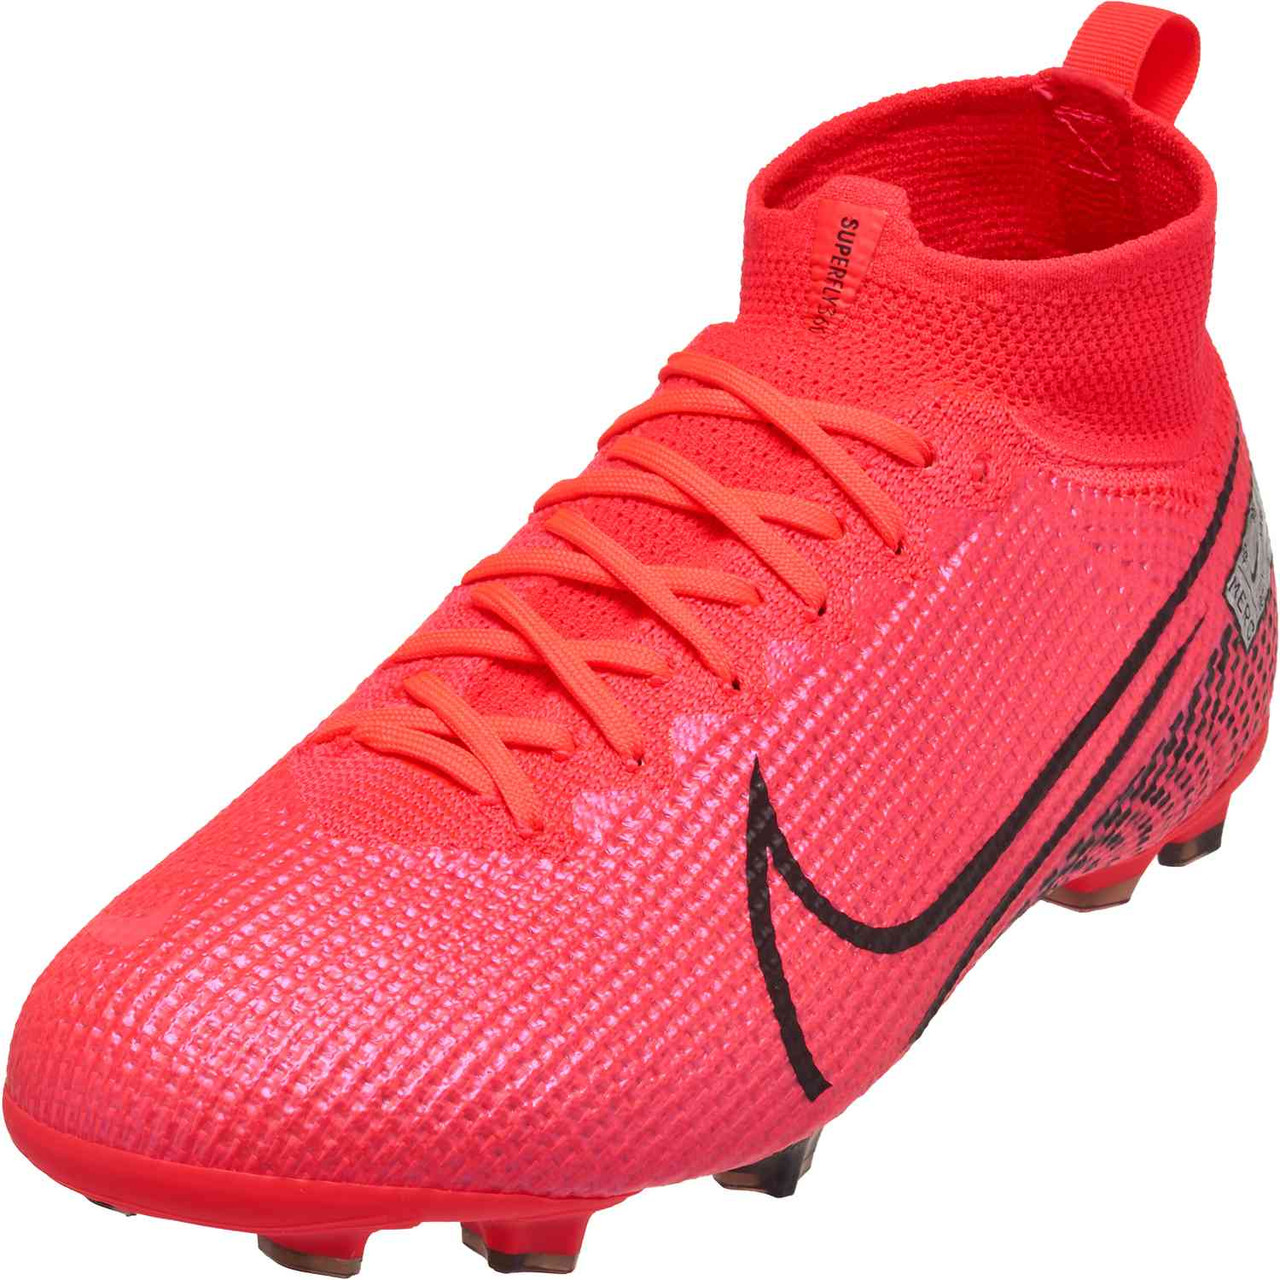 Superfly 6 Elite FG Firm Ground Soccer Cleat on Pinterest.